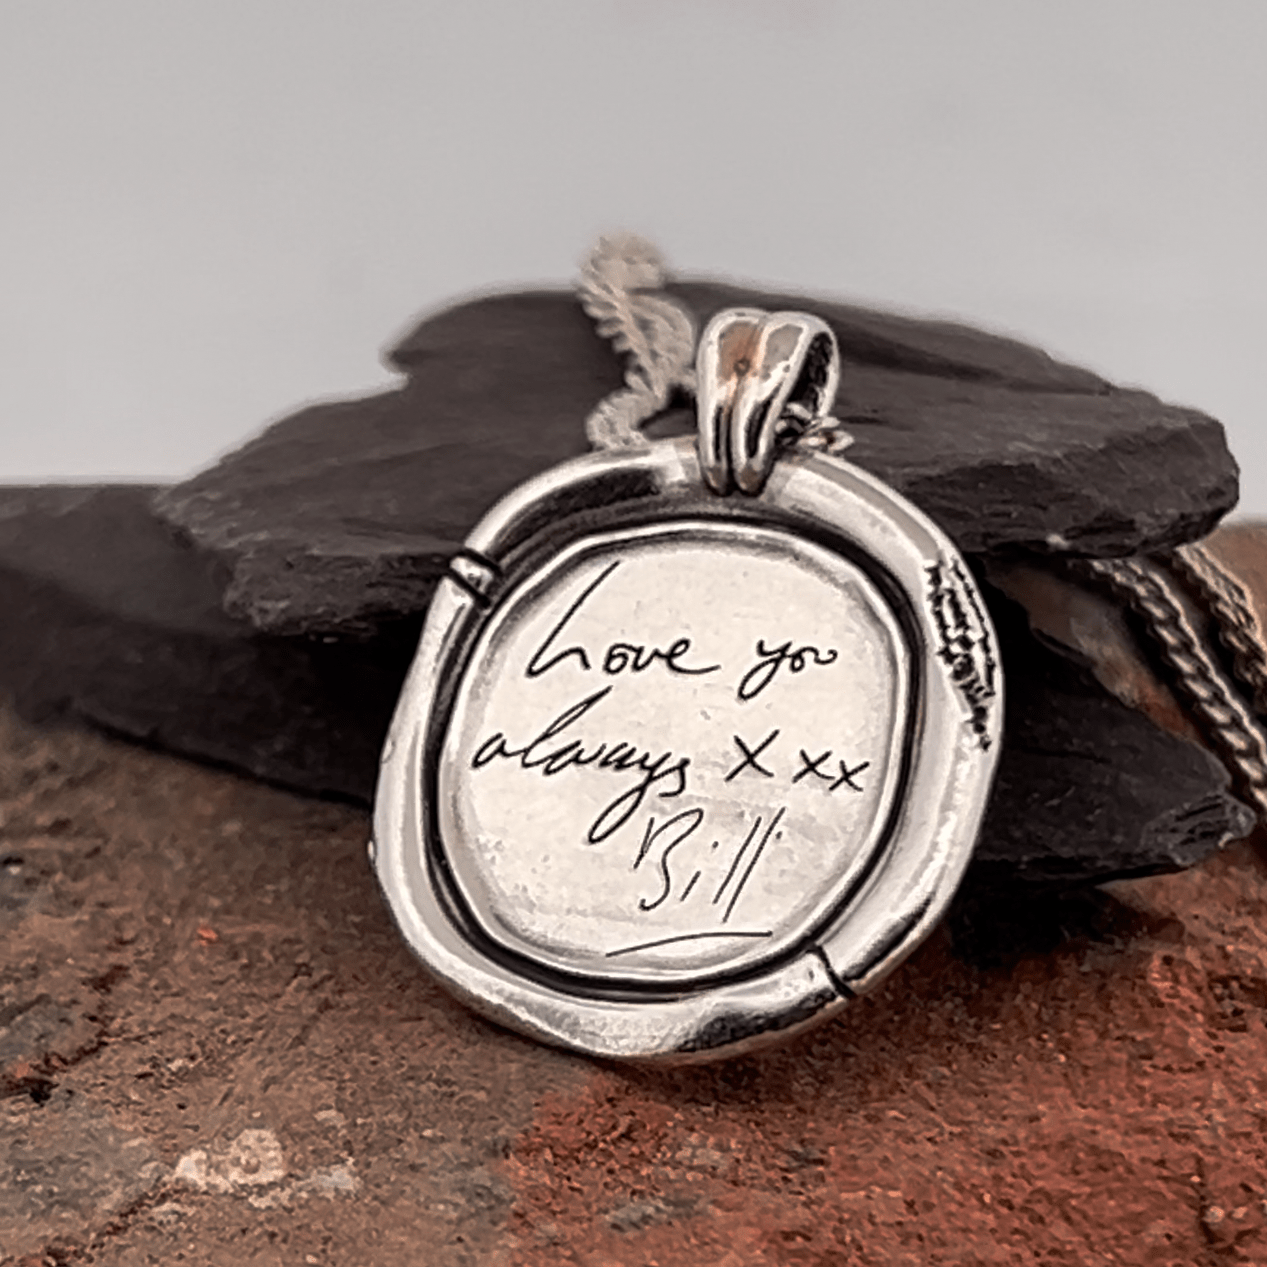 Handwriting Necklace Pendant by Chris Parry Jewellery